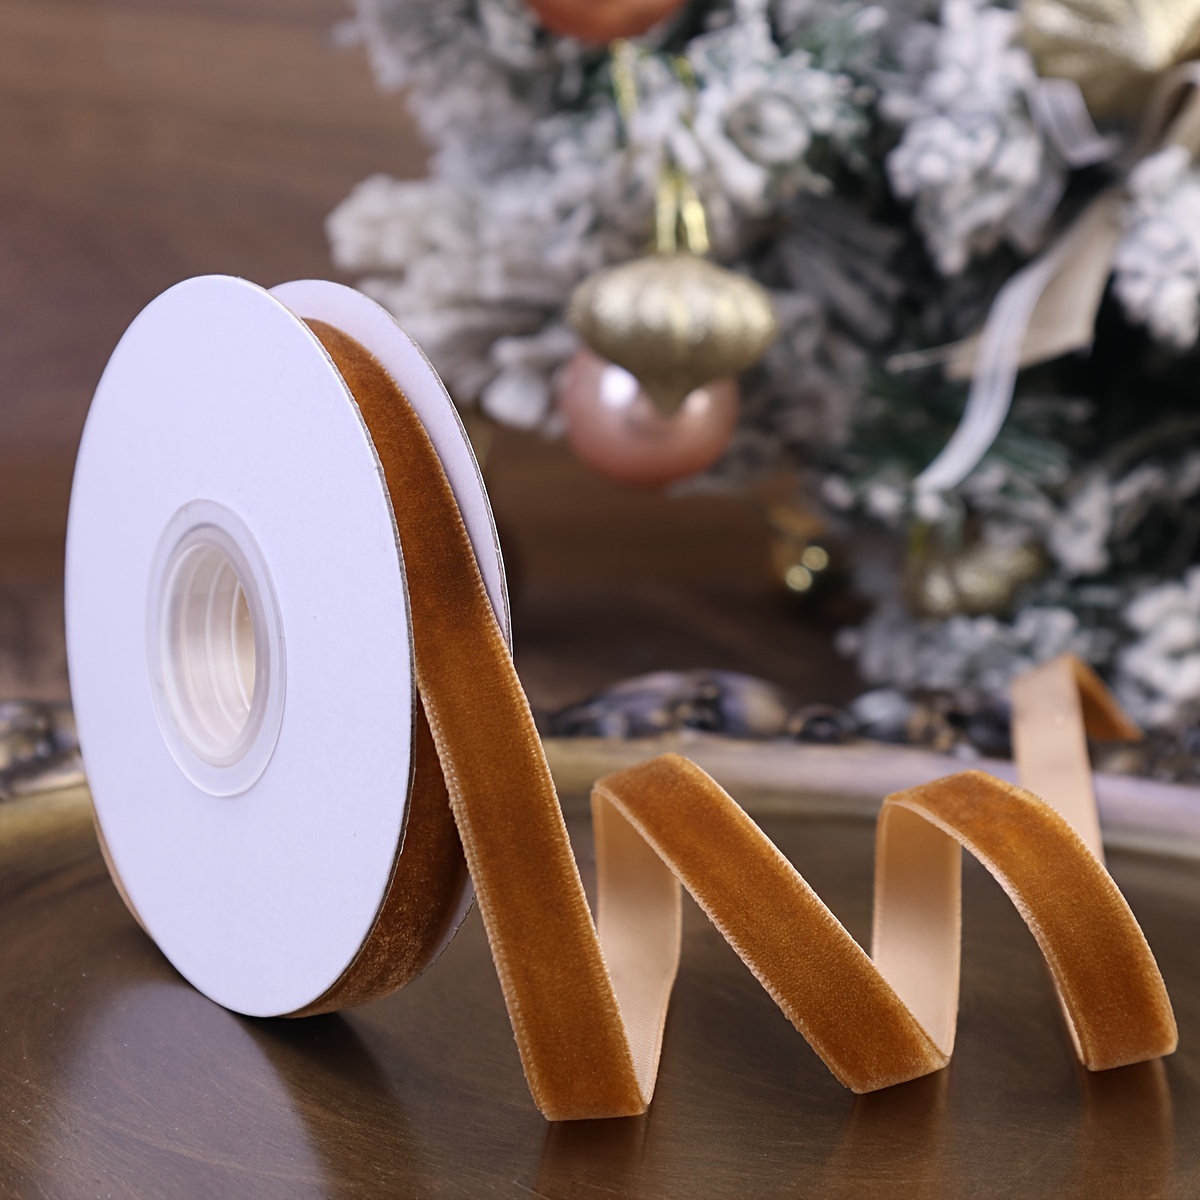 Velvet Ribbon For Gift Wrapping Christmas Tree Diy Crafts, Vintage